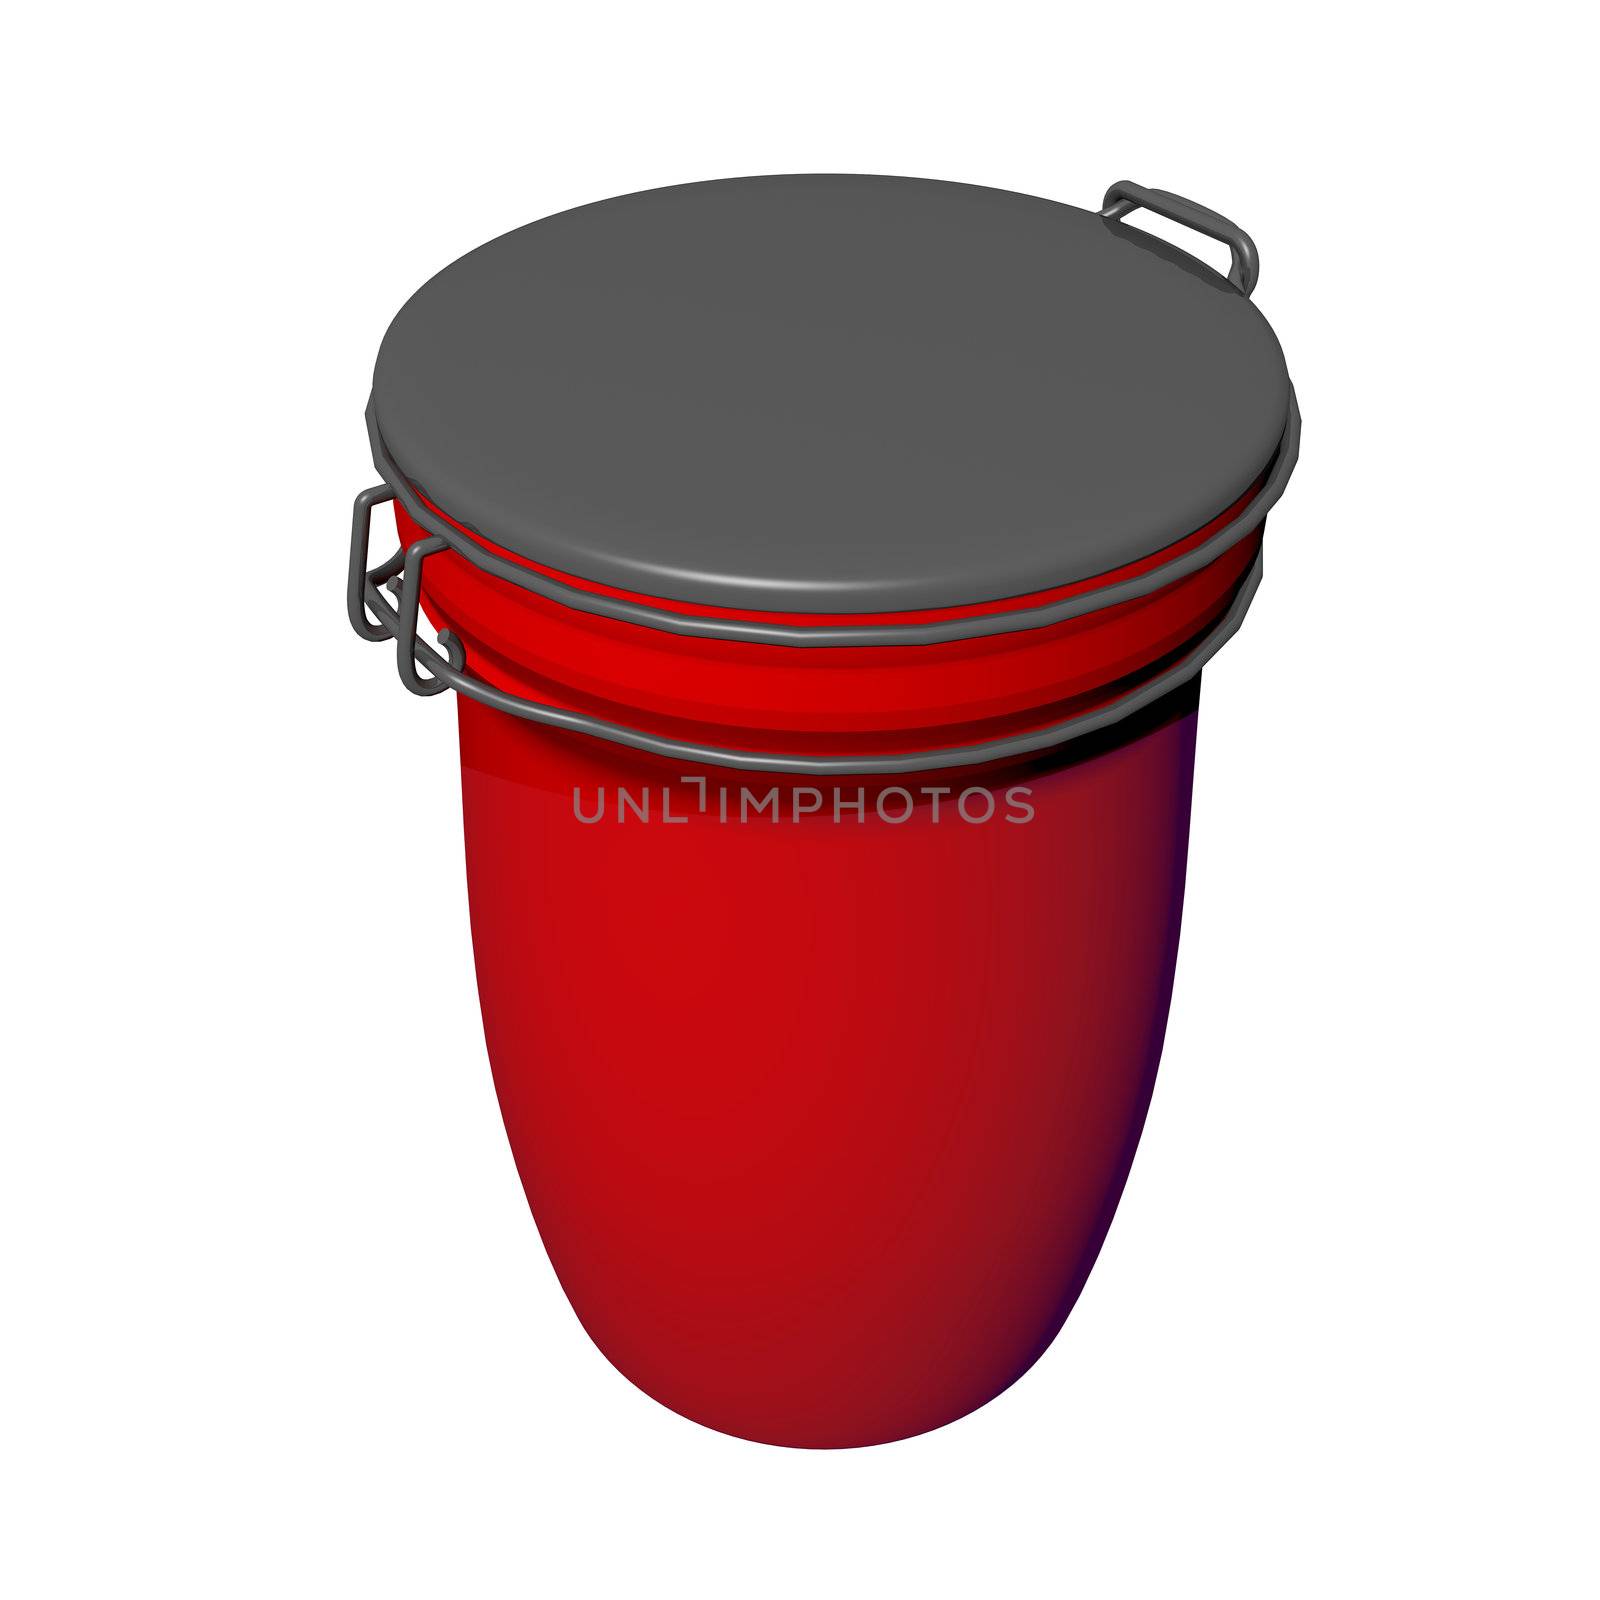 Red and grey jar with lid lock, 3D illustration by Morphart